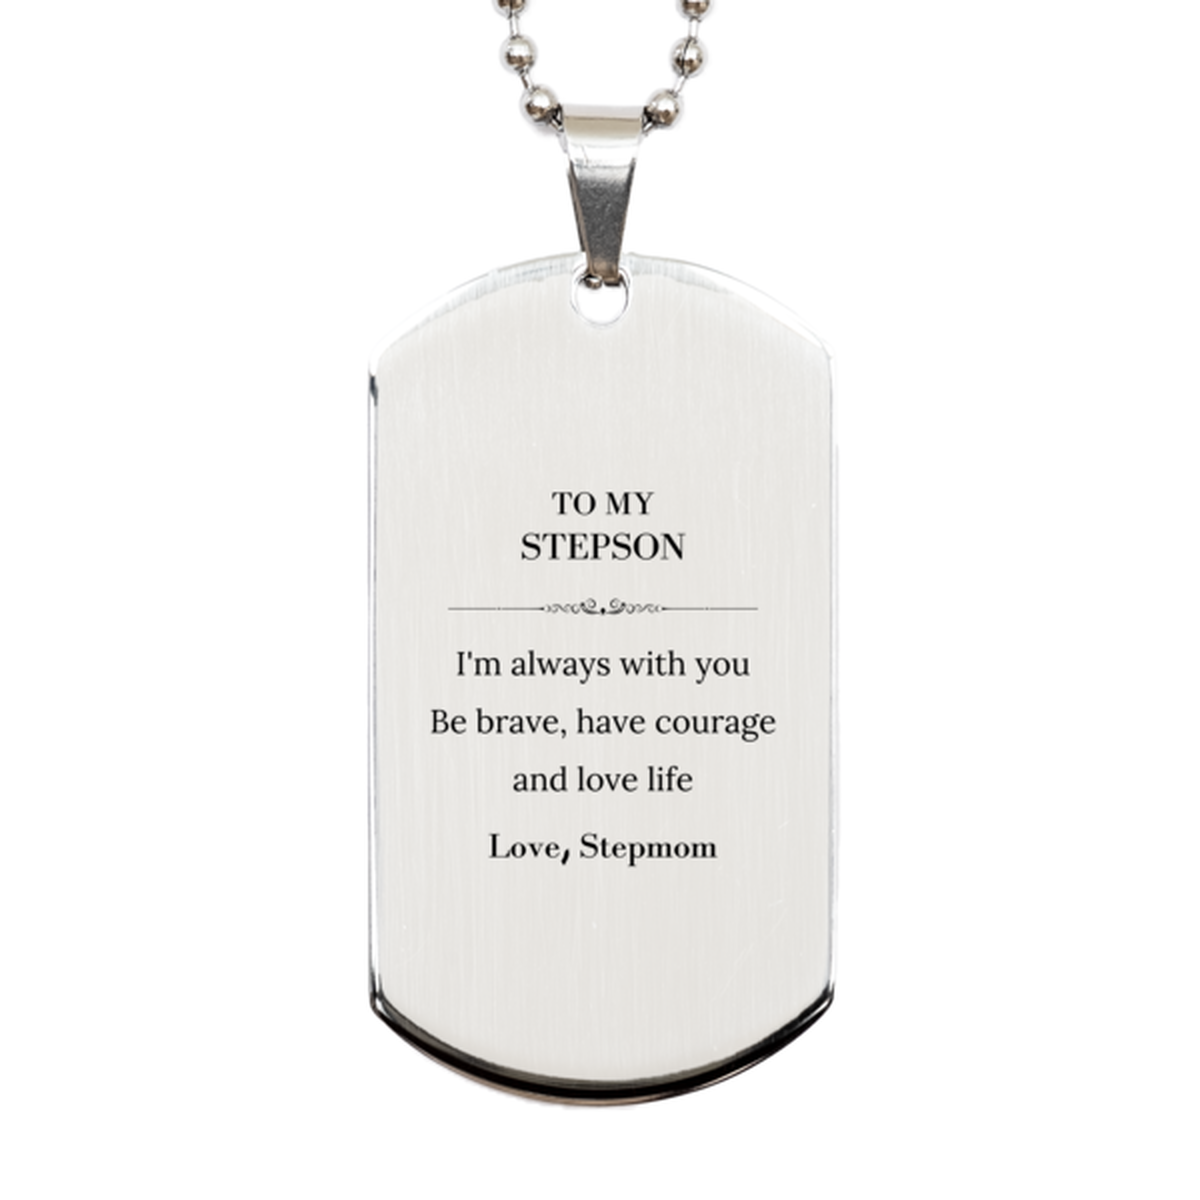 To My Stepson Gifts from Stepmom, Unique Silver Dog Tag Inspirational Christmas Birthday Graduation Gifts for Stepson I'm always with you. Be brave, have courage and love life. Love, Stepmom